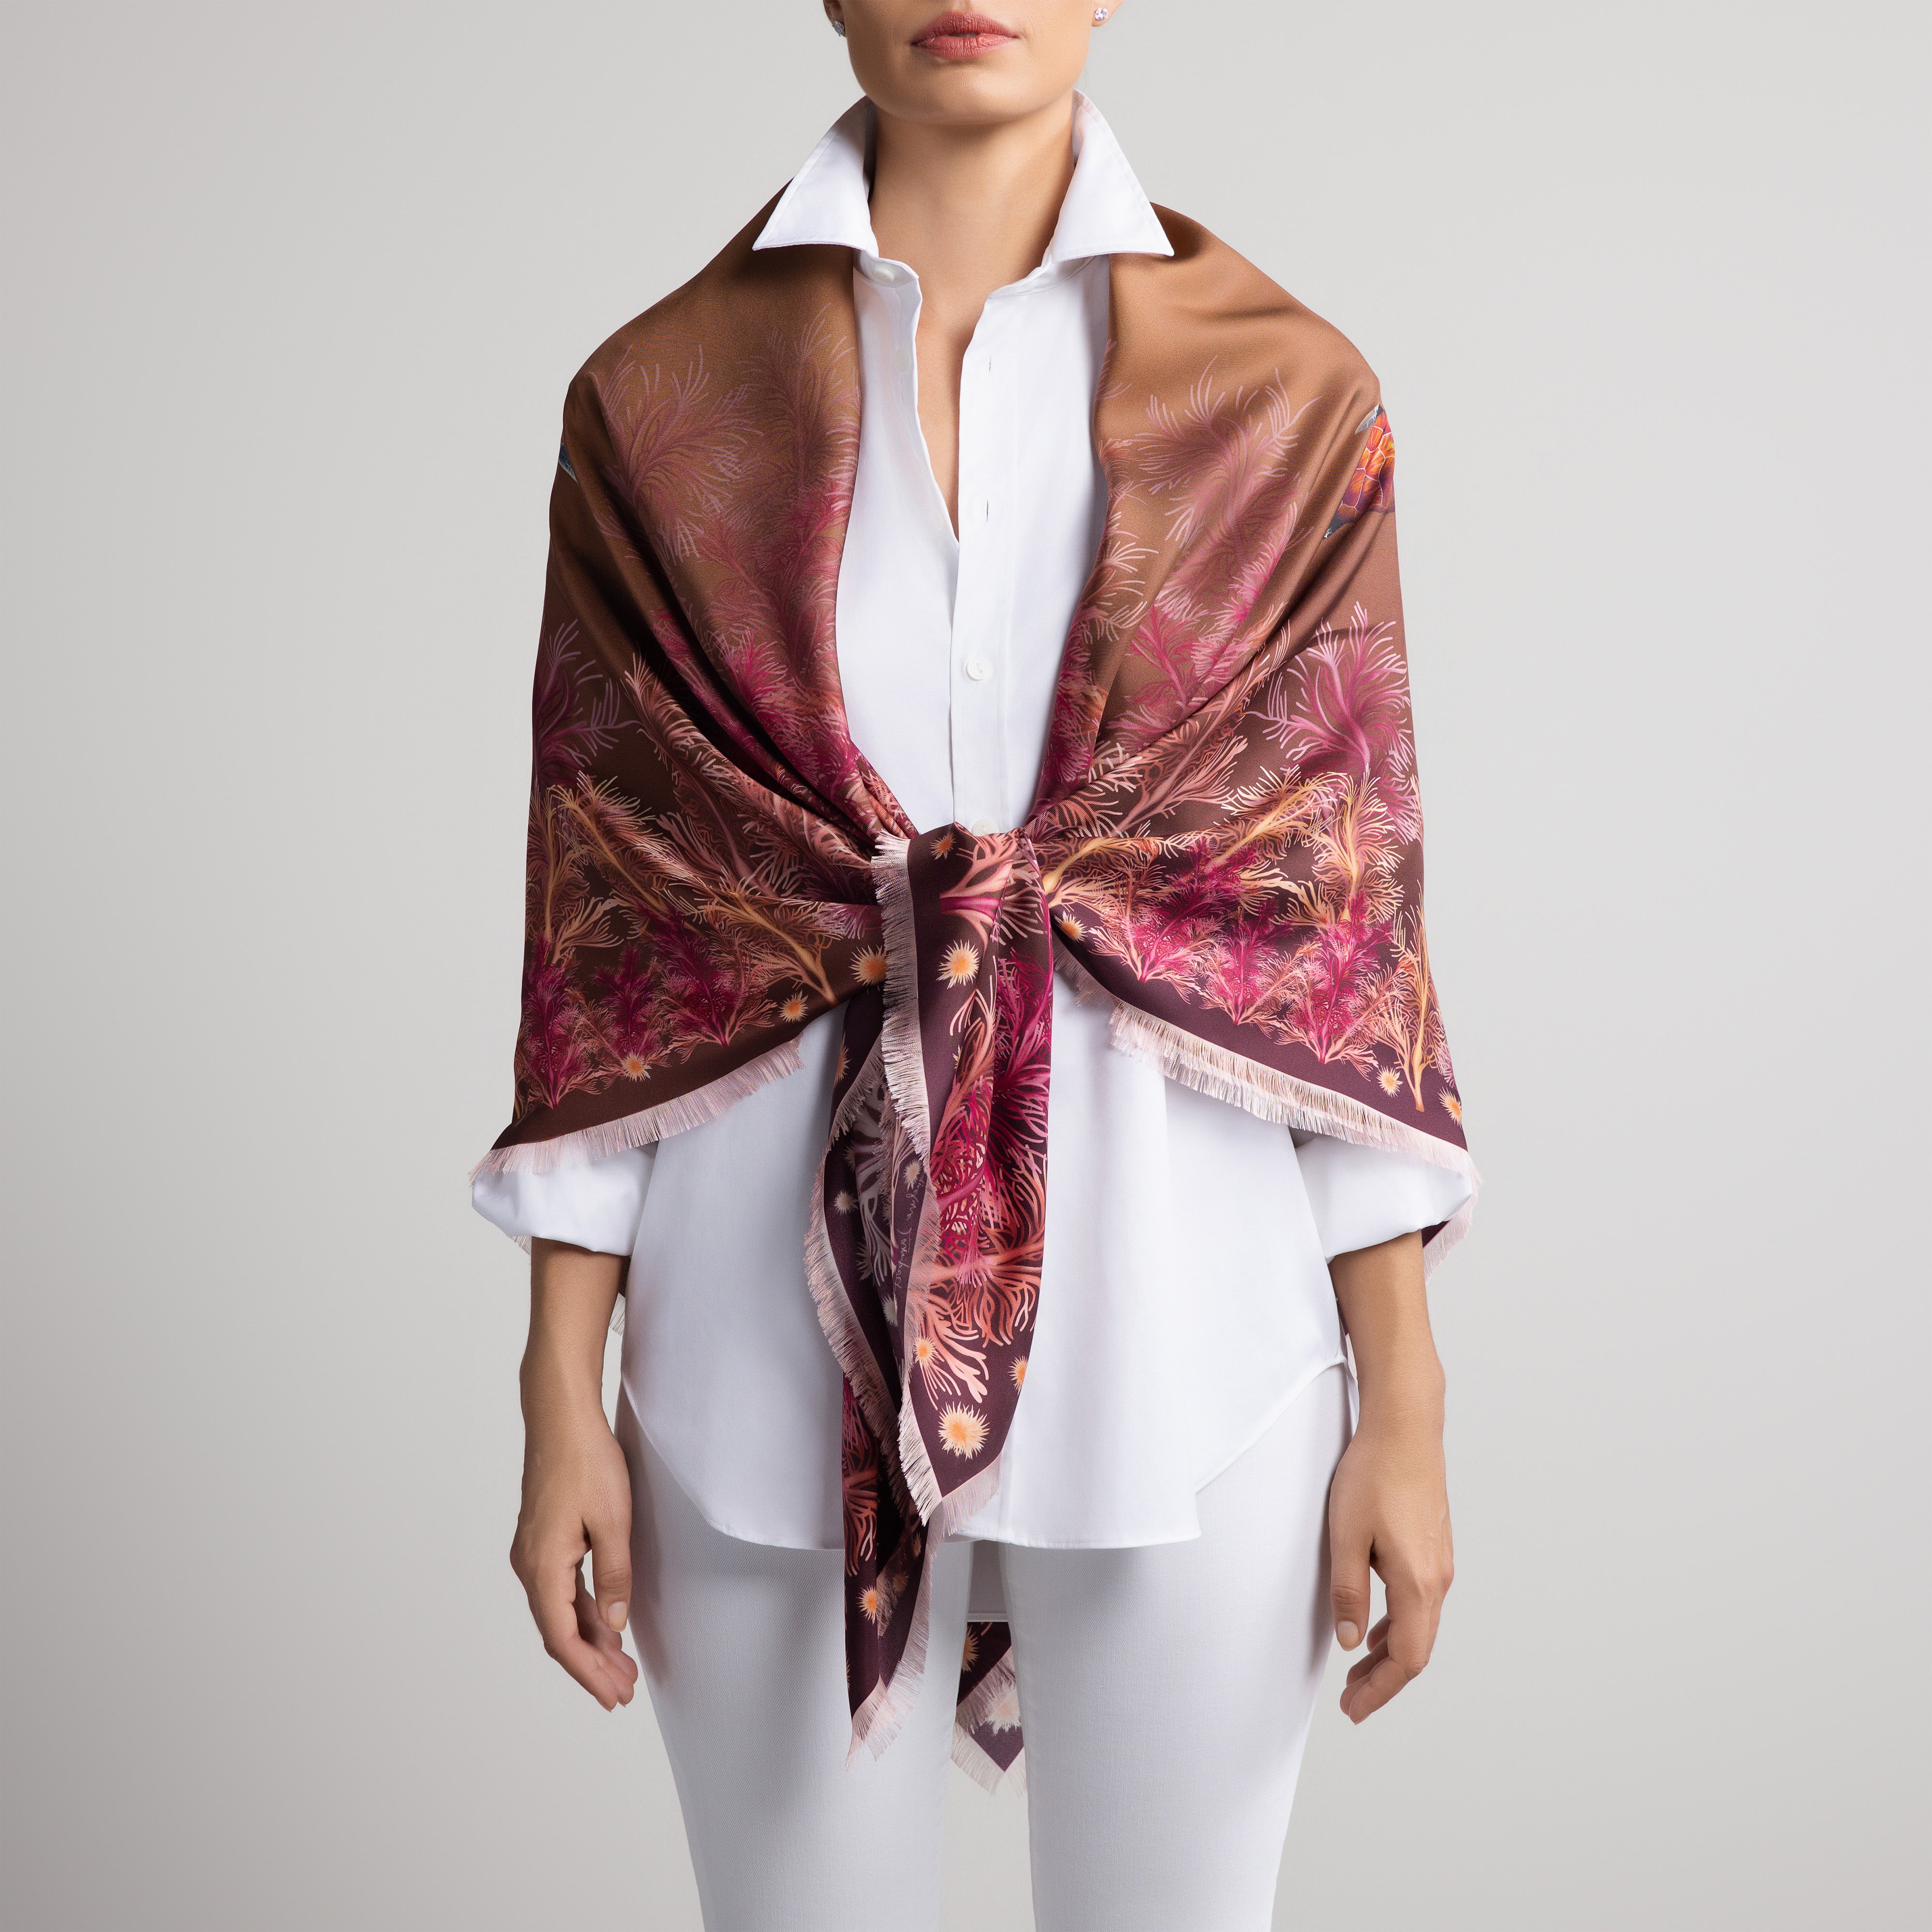 Galapagos Grande Silk Scarf in Brown Ombré with Hand-Feathered Edges